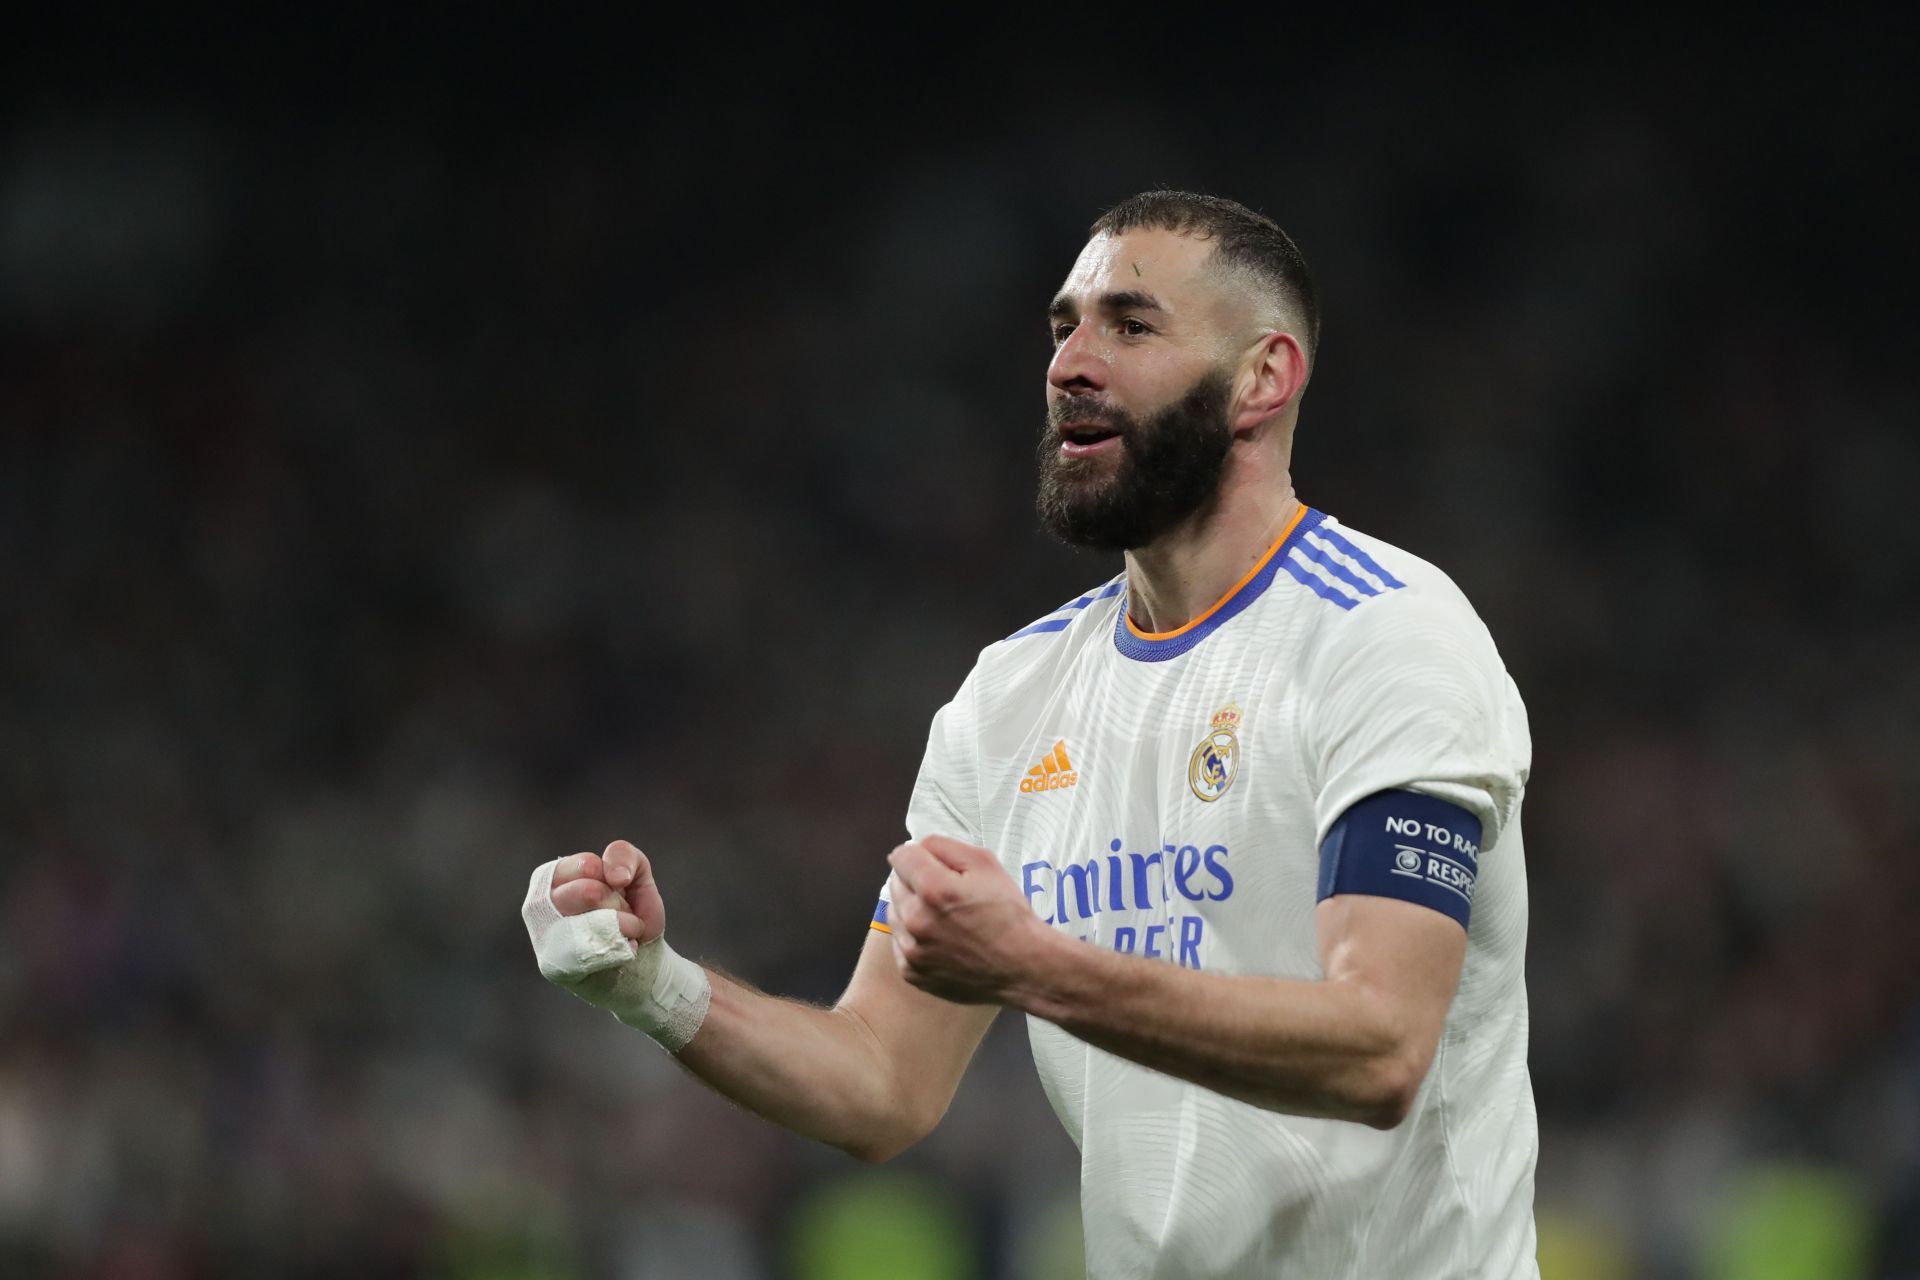 Karim Benzema has been unstoppable in the 2021-22 season.